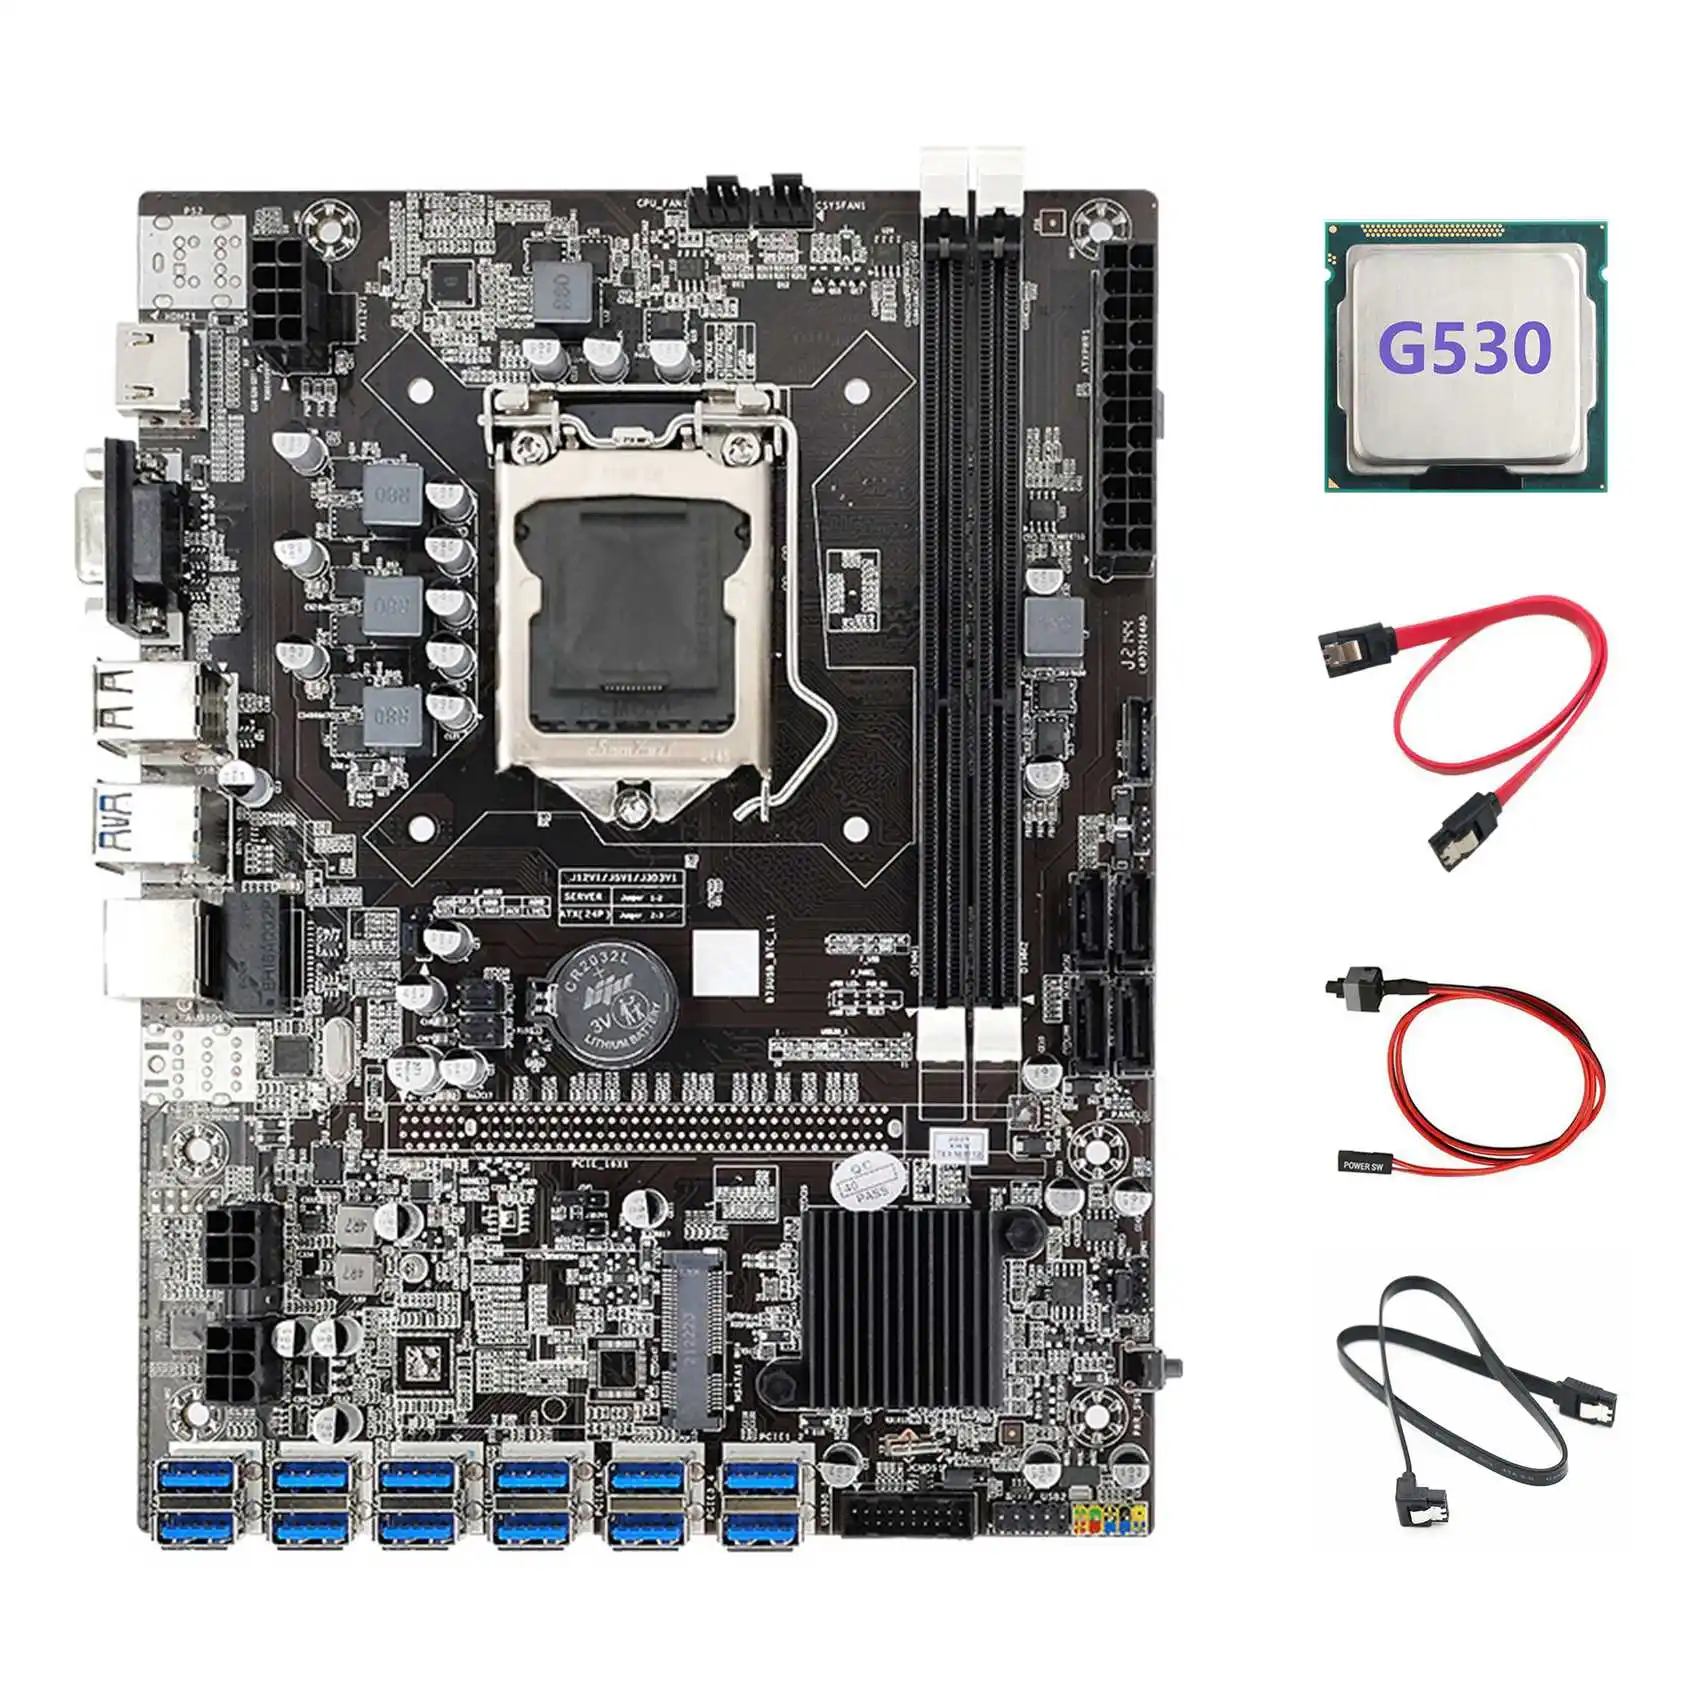 B75 12USB BTC Mining Motherboard+G530 CPU+2XSATA Cable+Switch Cable 12 PCIE to USB3.0 B75 USB ETH Miner Motherboard